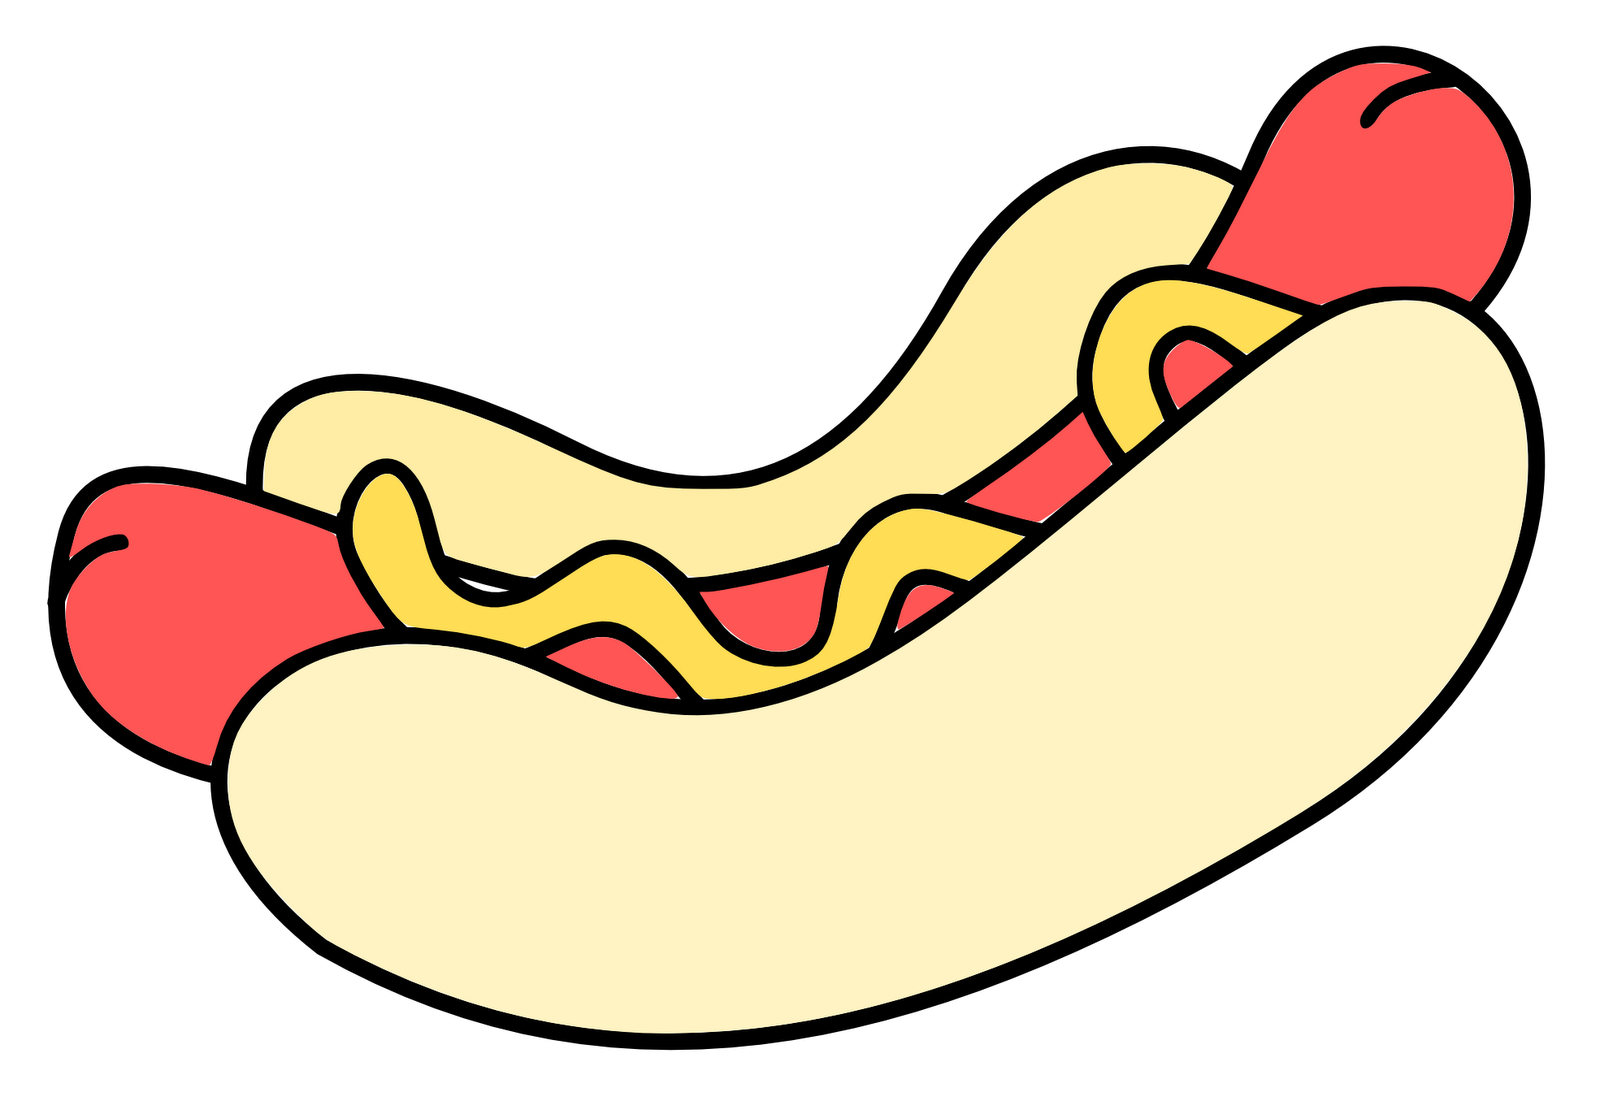 free black and white hot dog clipart - photo #14